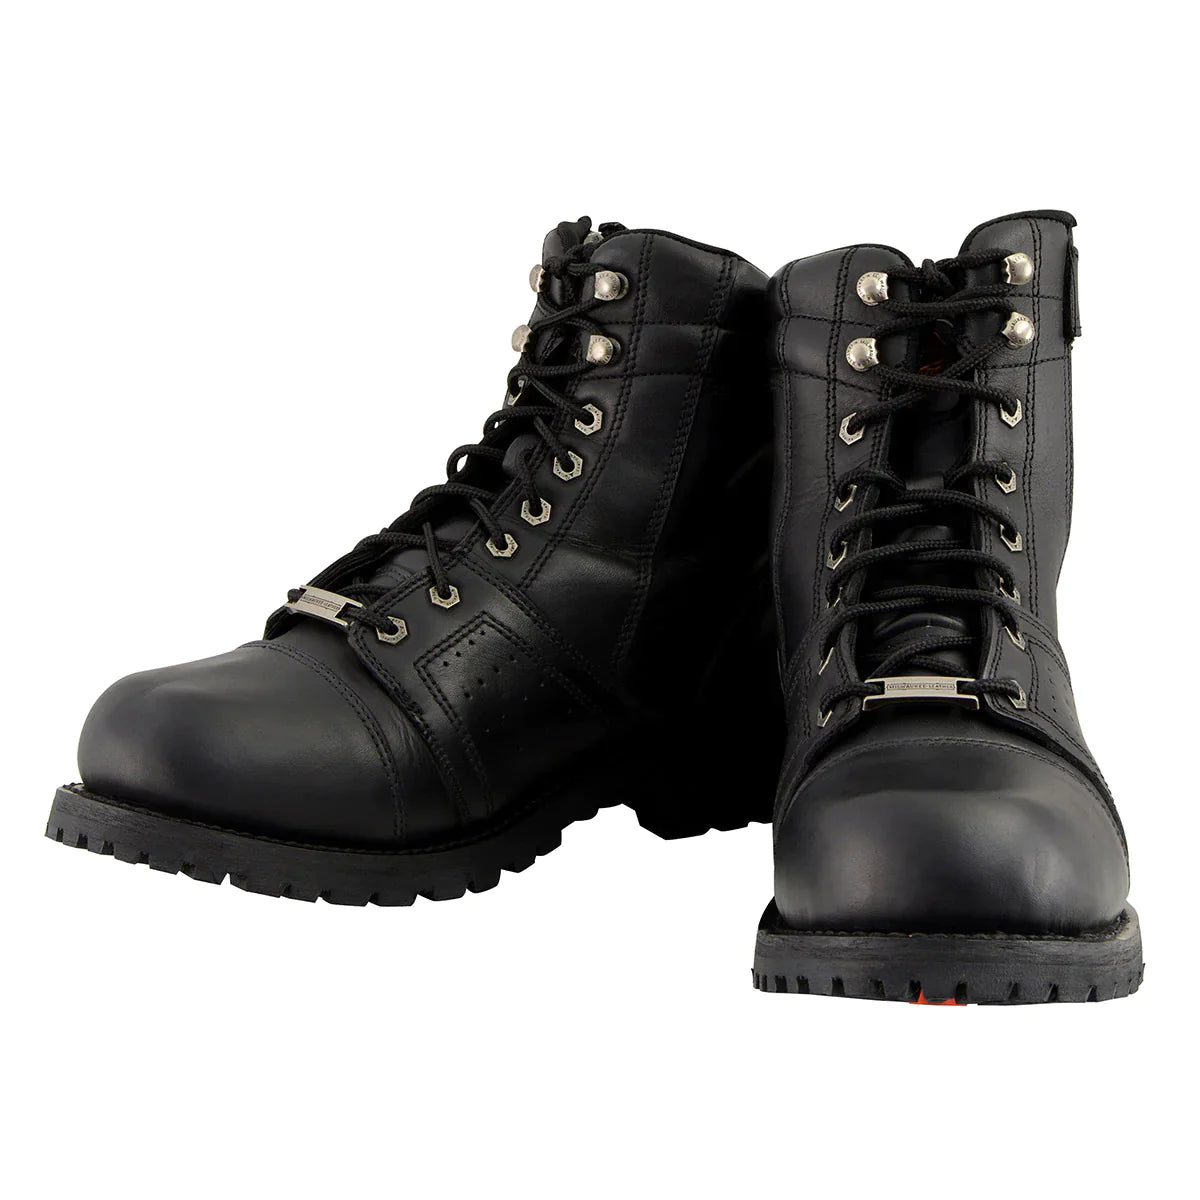 Men's Black Lace-Up 'Wide-Width' Motorcycle Leather Boots with Side Zipper Entry